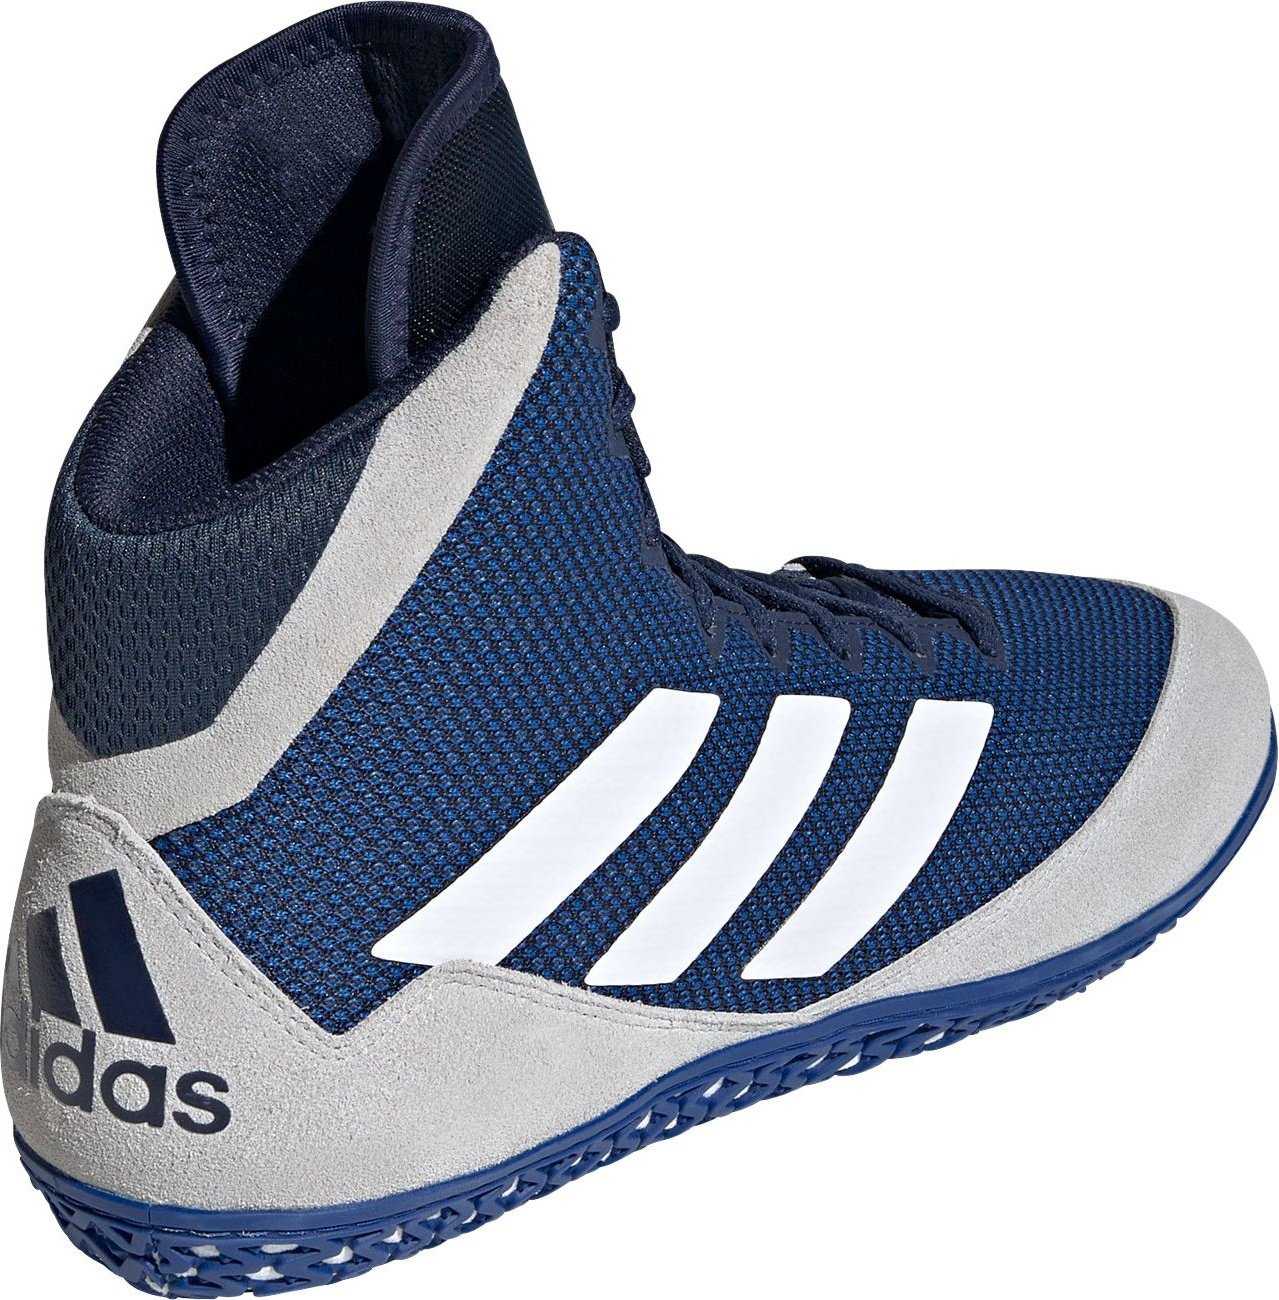 Adidas 232 Mat Wizard 5 Wrestling Shoes - Navy Gray White